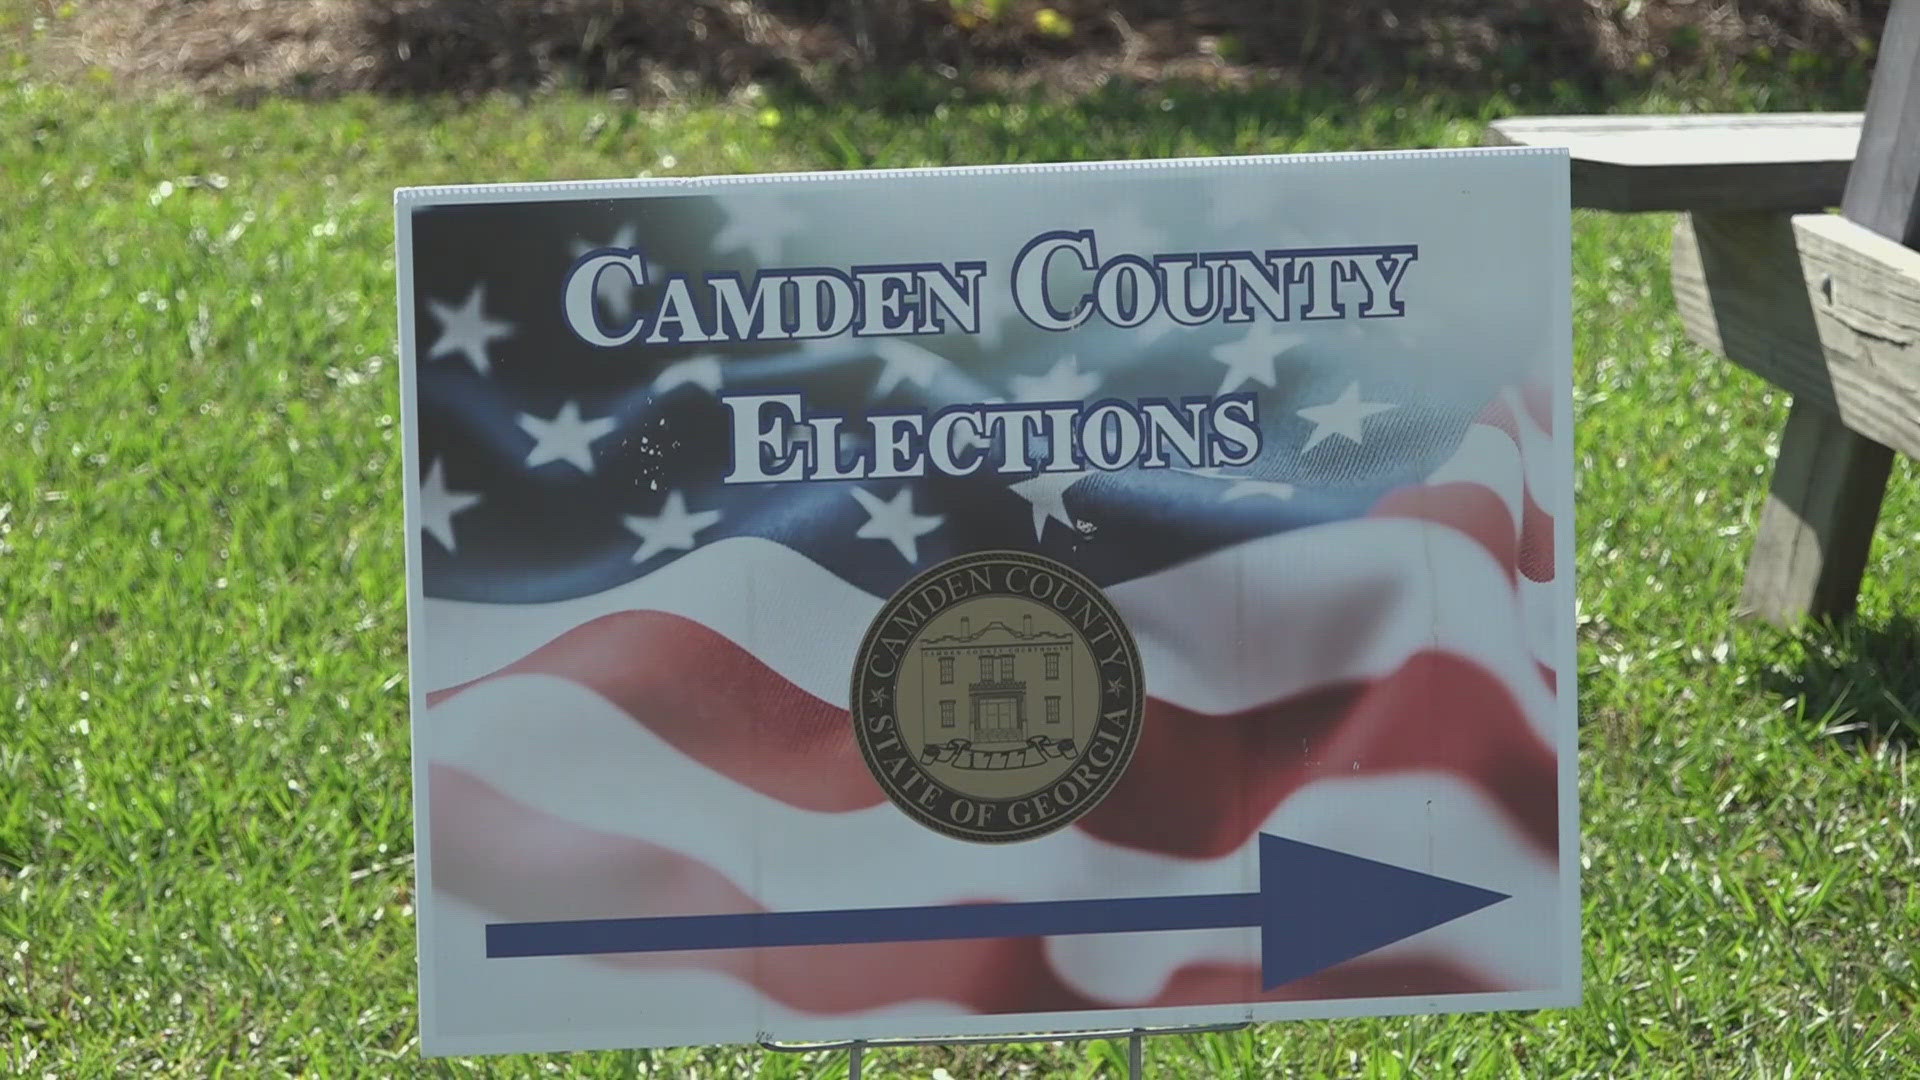 The Camden County Elections Office said they had around eight percent of residents participate in early voting, which is higher than the state average of 5.5%.